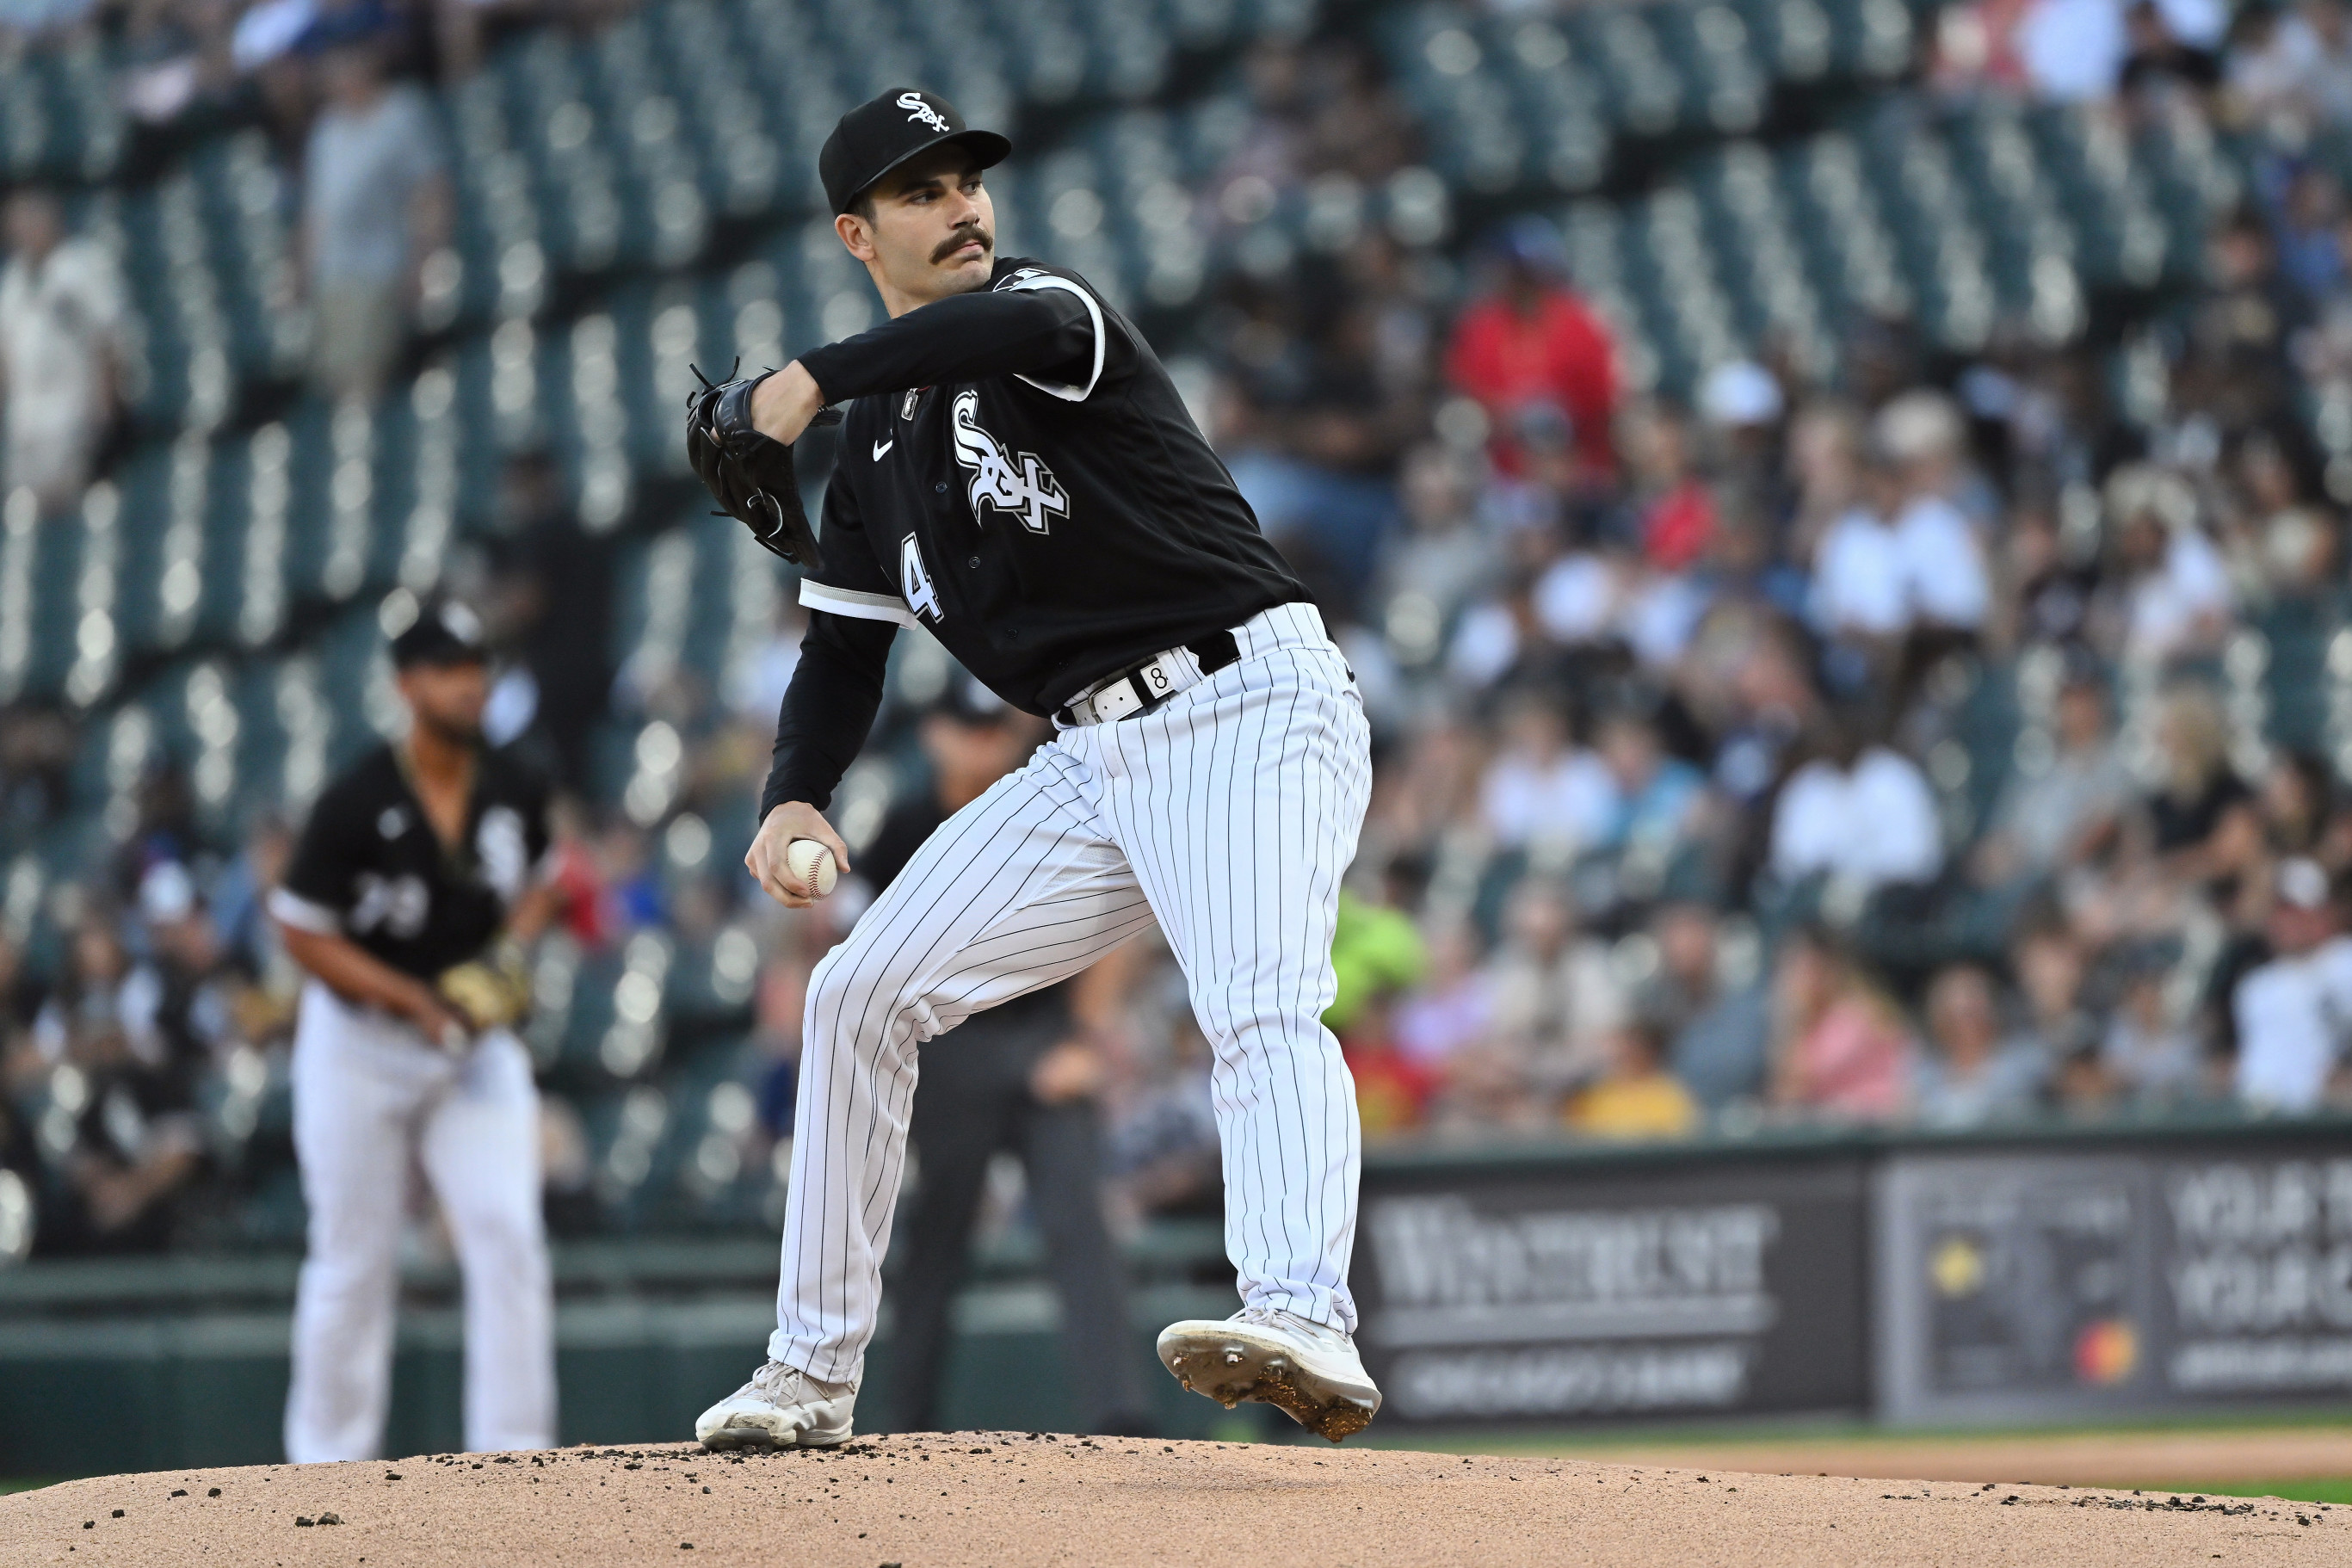 White Sox pitcher Dylan Cease one of 2022's biggest All-Star snubs